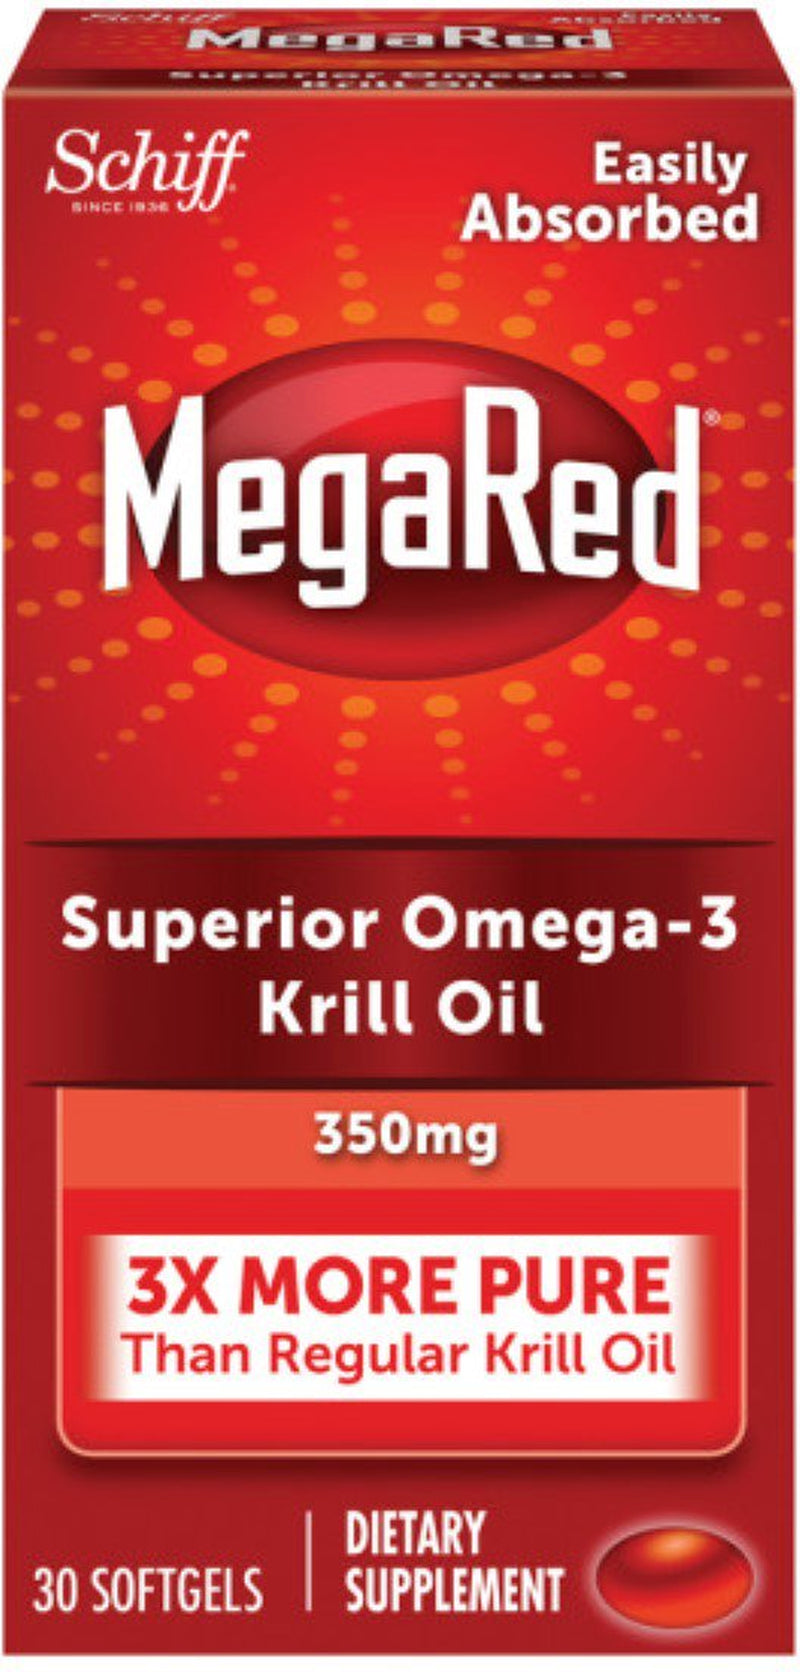 Megared Superior Omega-3 Krill Oil Softgels, 350 Mg, 30 Ct, 3 Pack